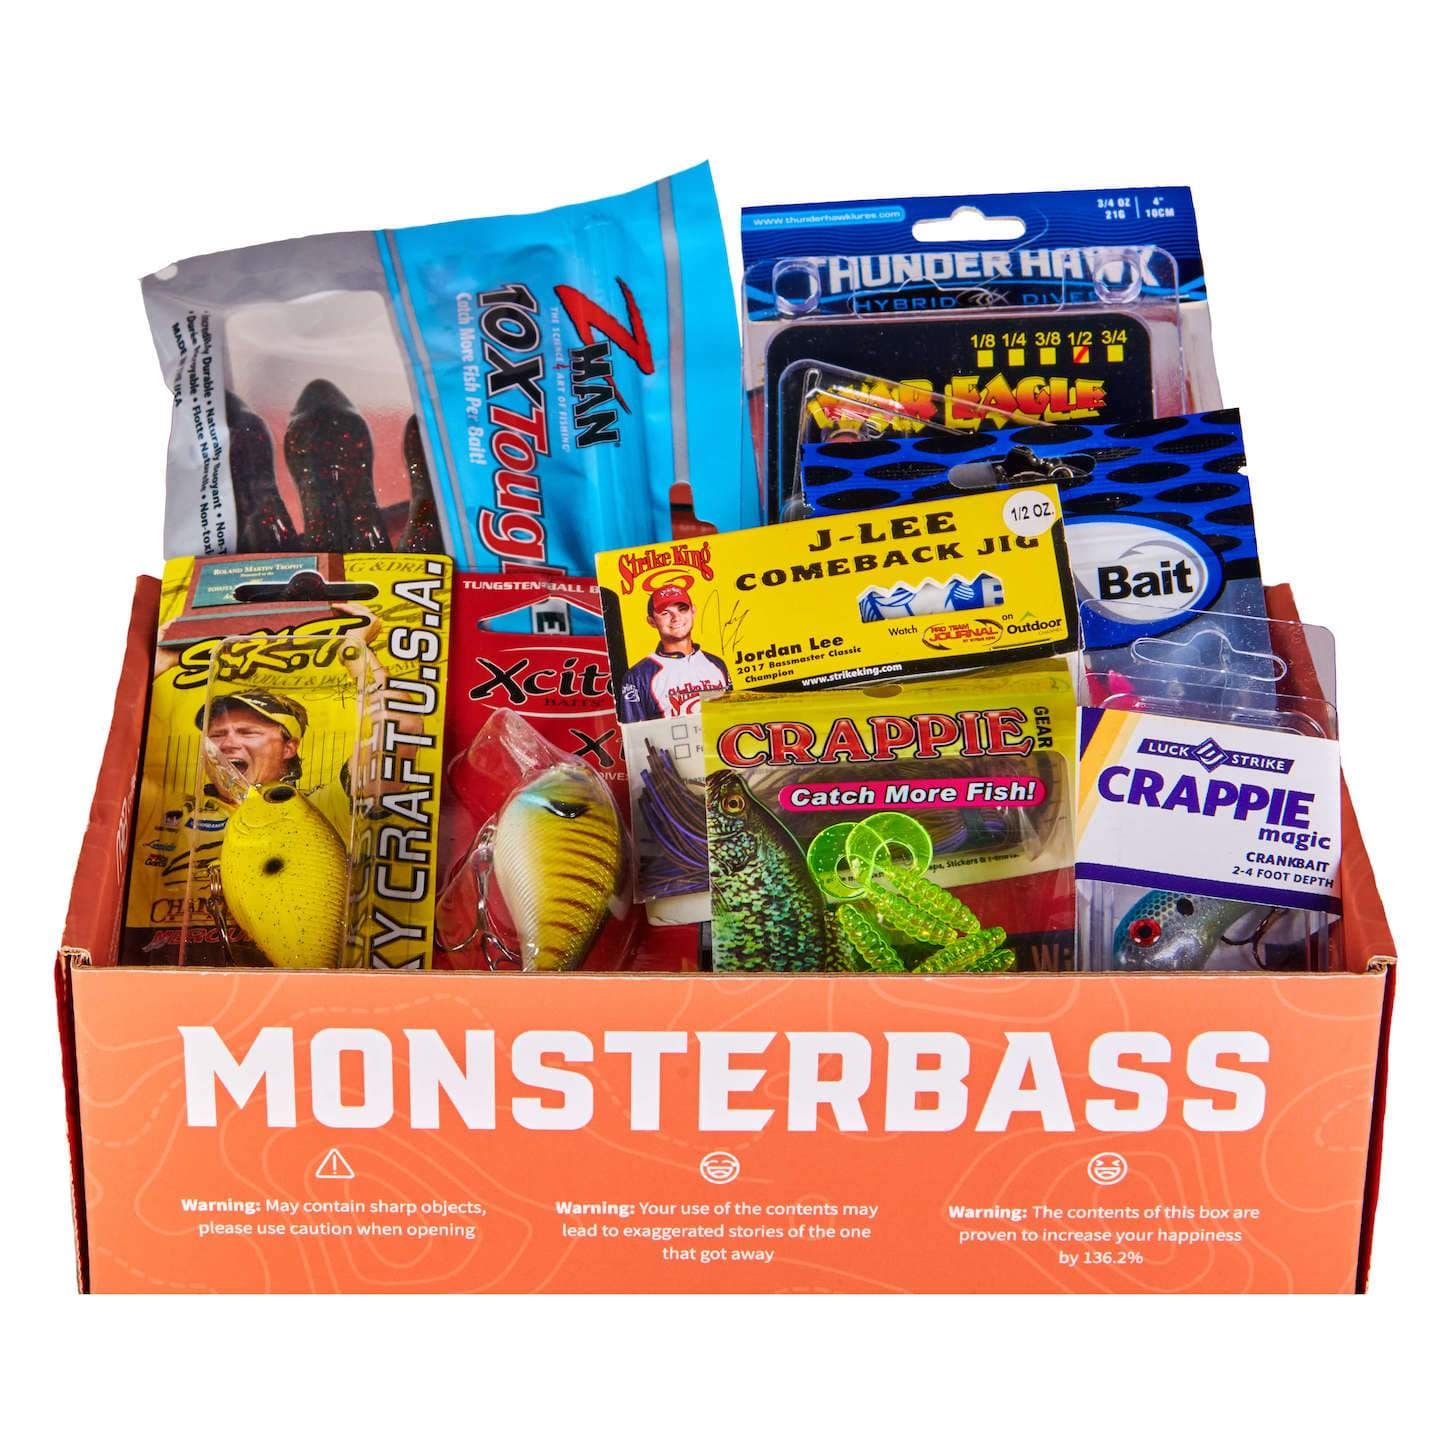 REVIEW: The Mystery Tackle Bass Fishing Box - Is It Worth It